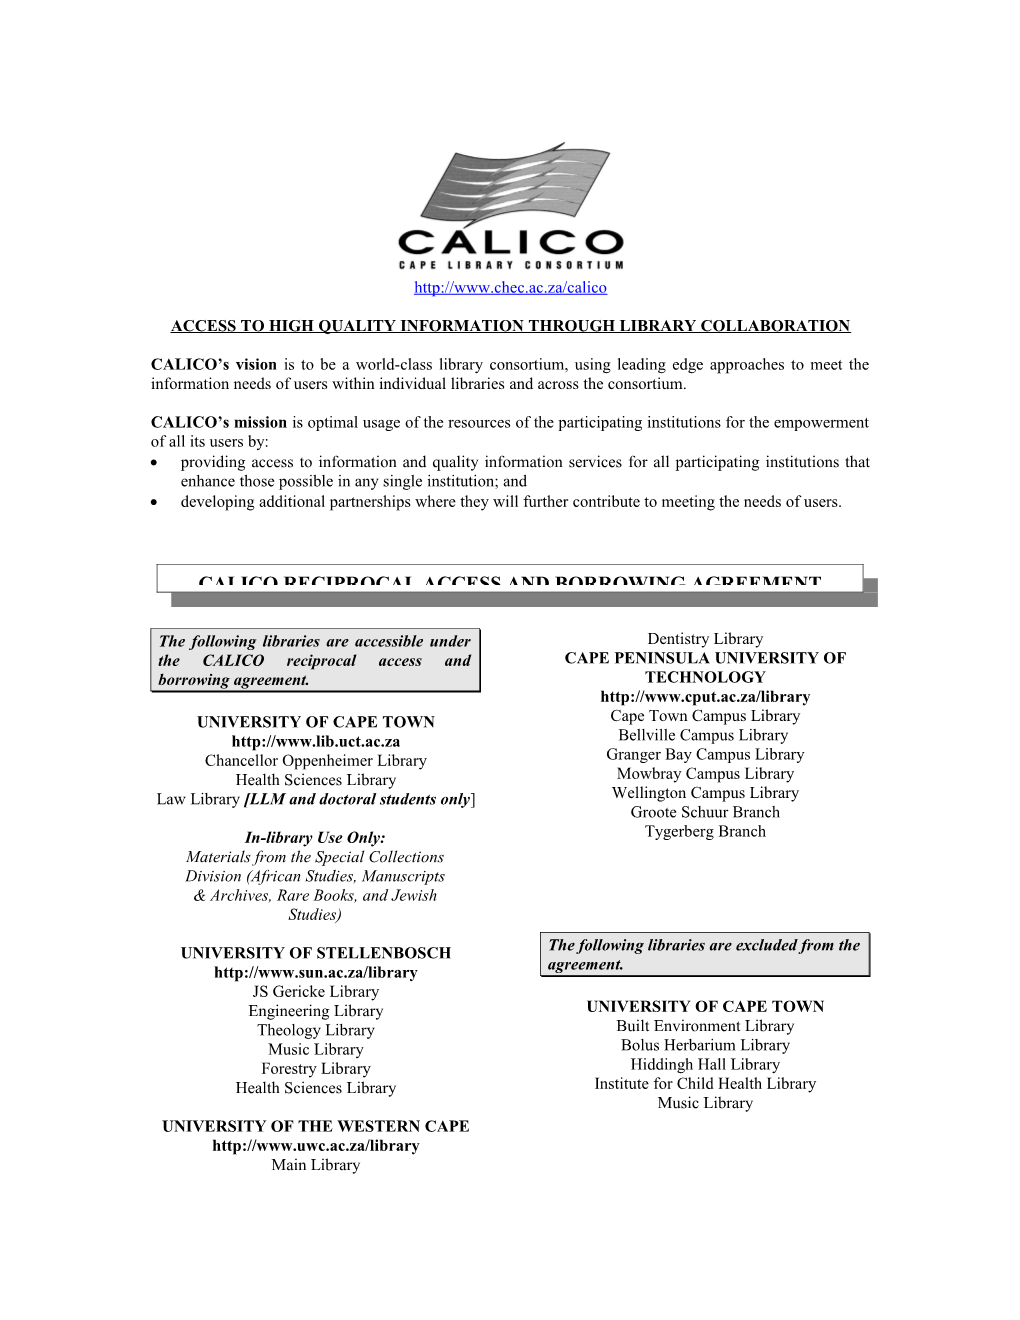 Access to Calico Libraries and Collections